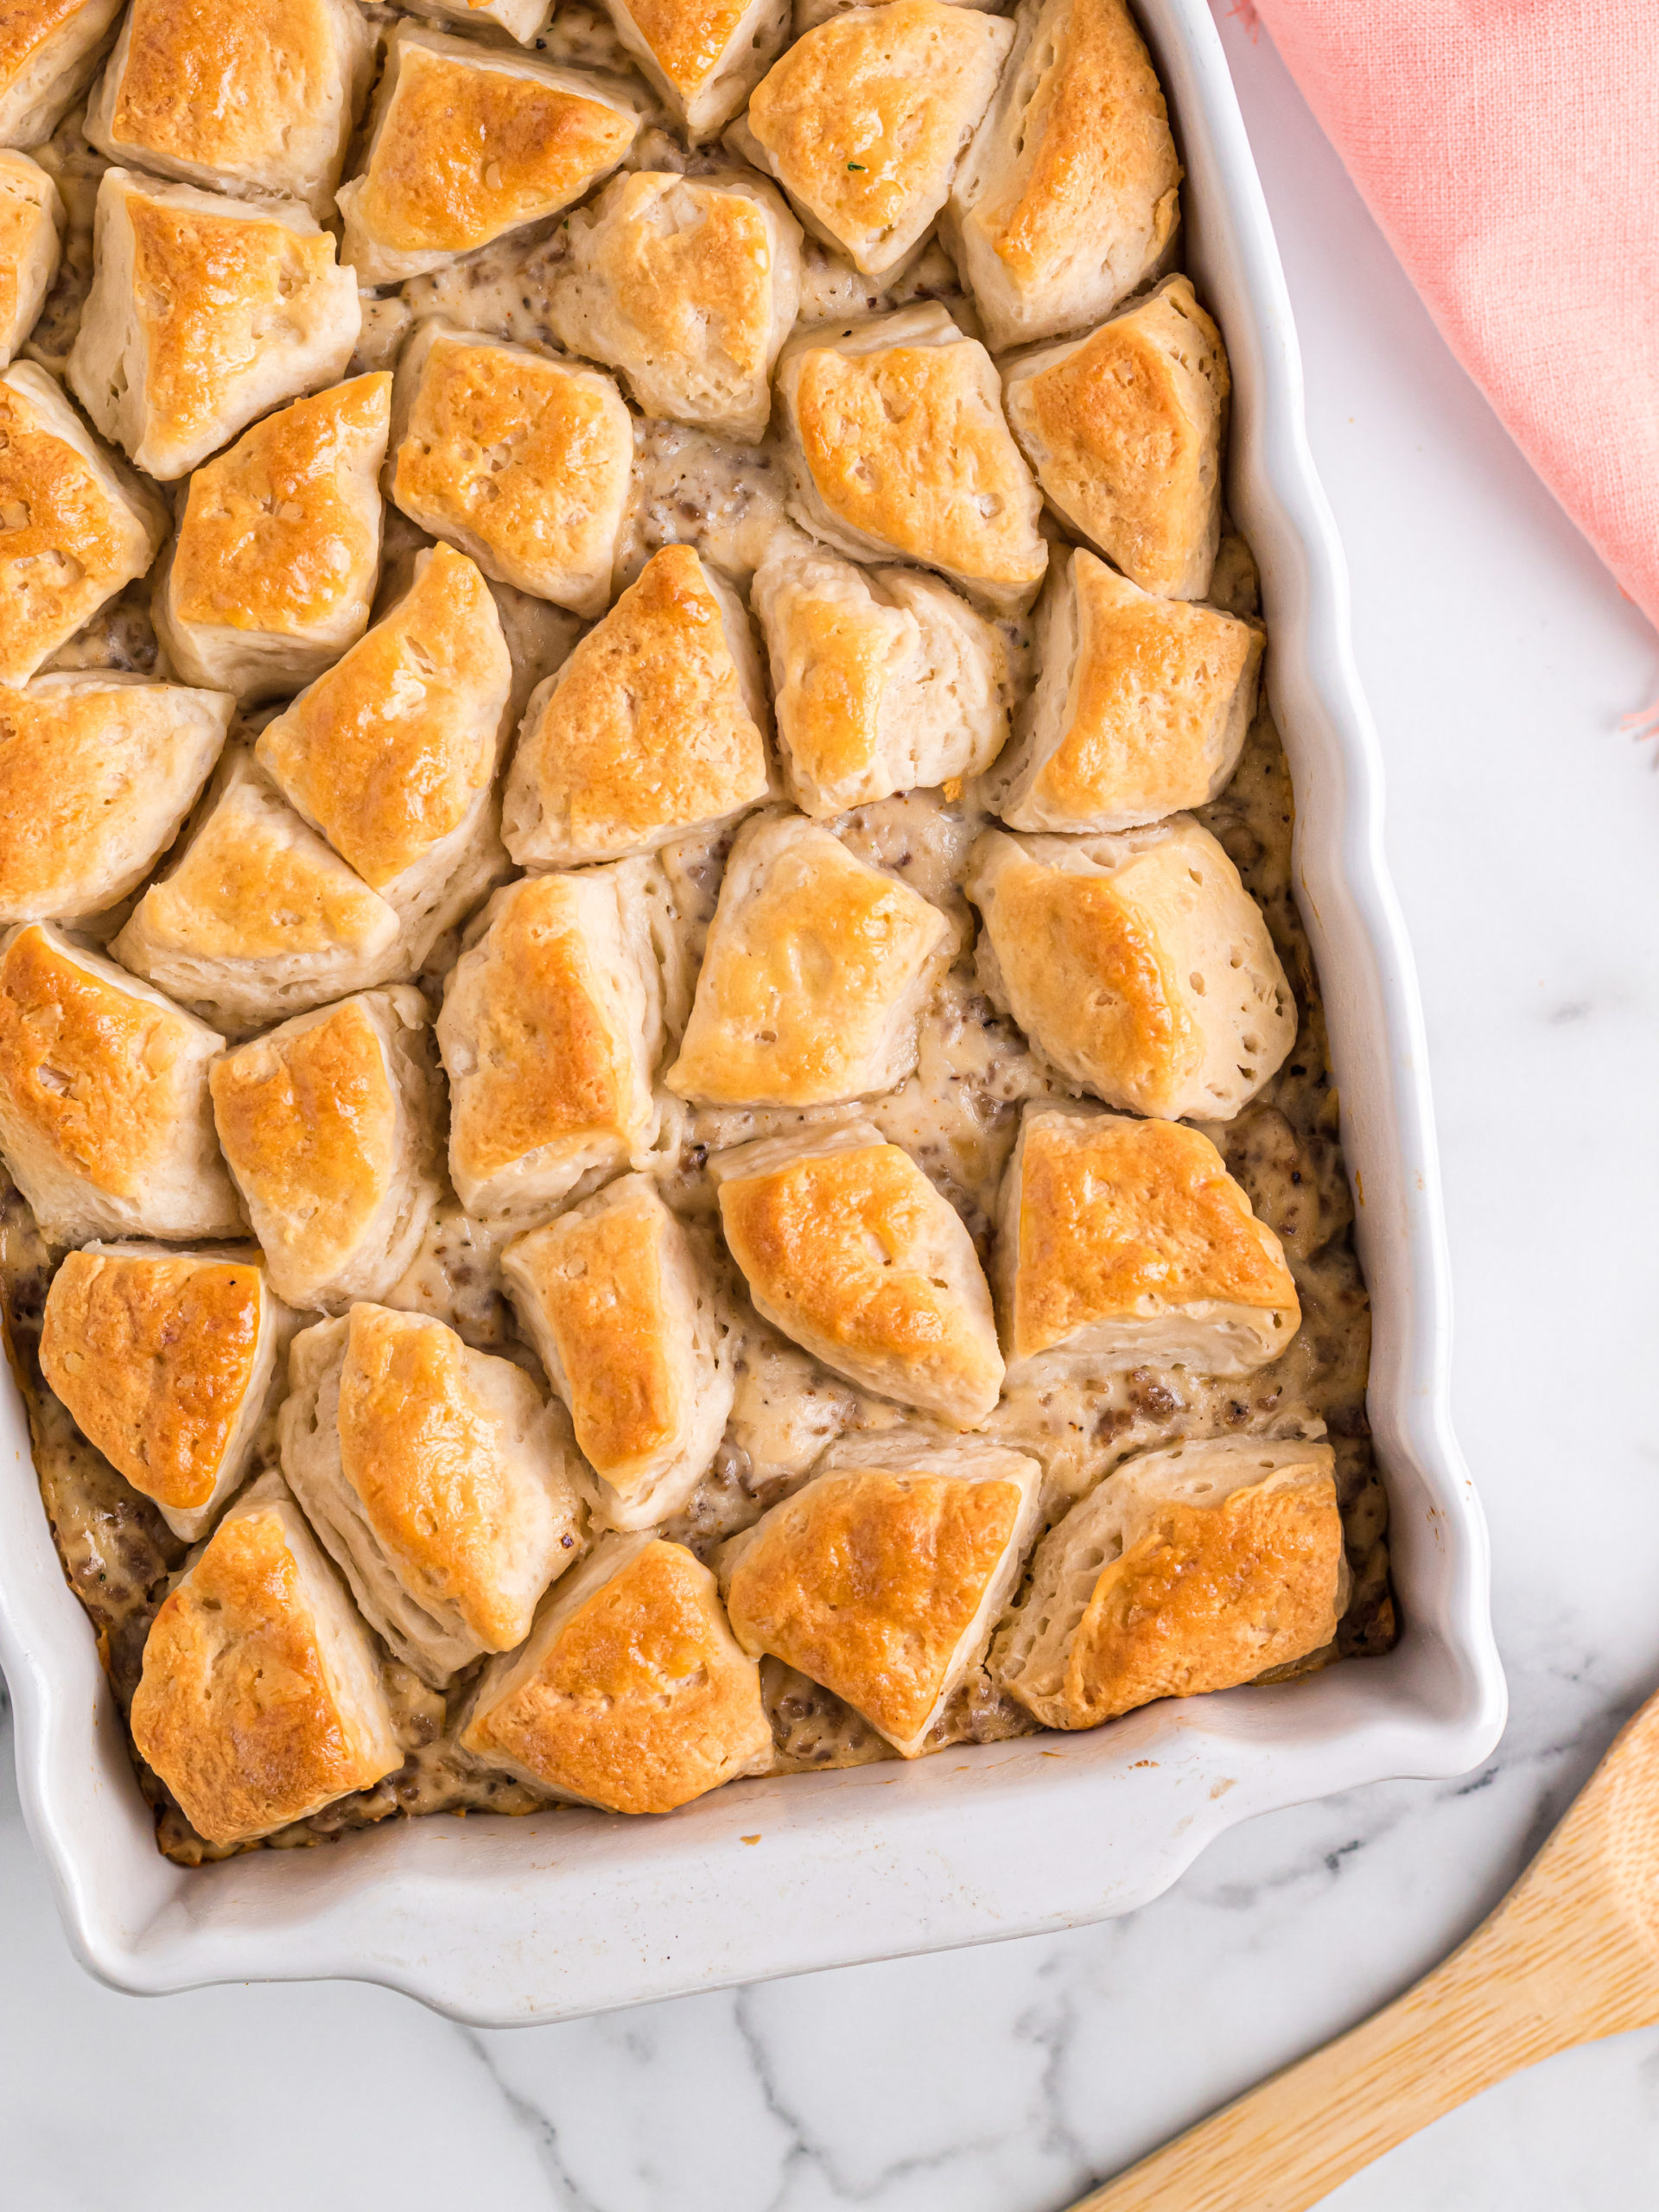 Biscuits and Gravy Casserole - Tastes Better from Scratch